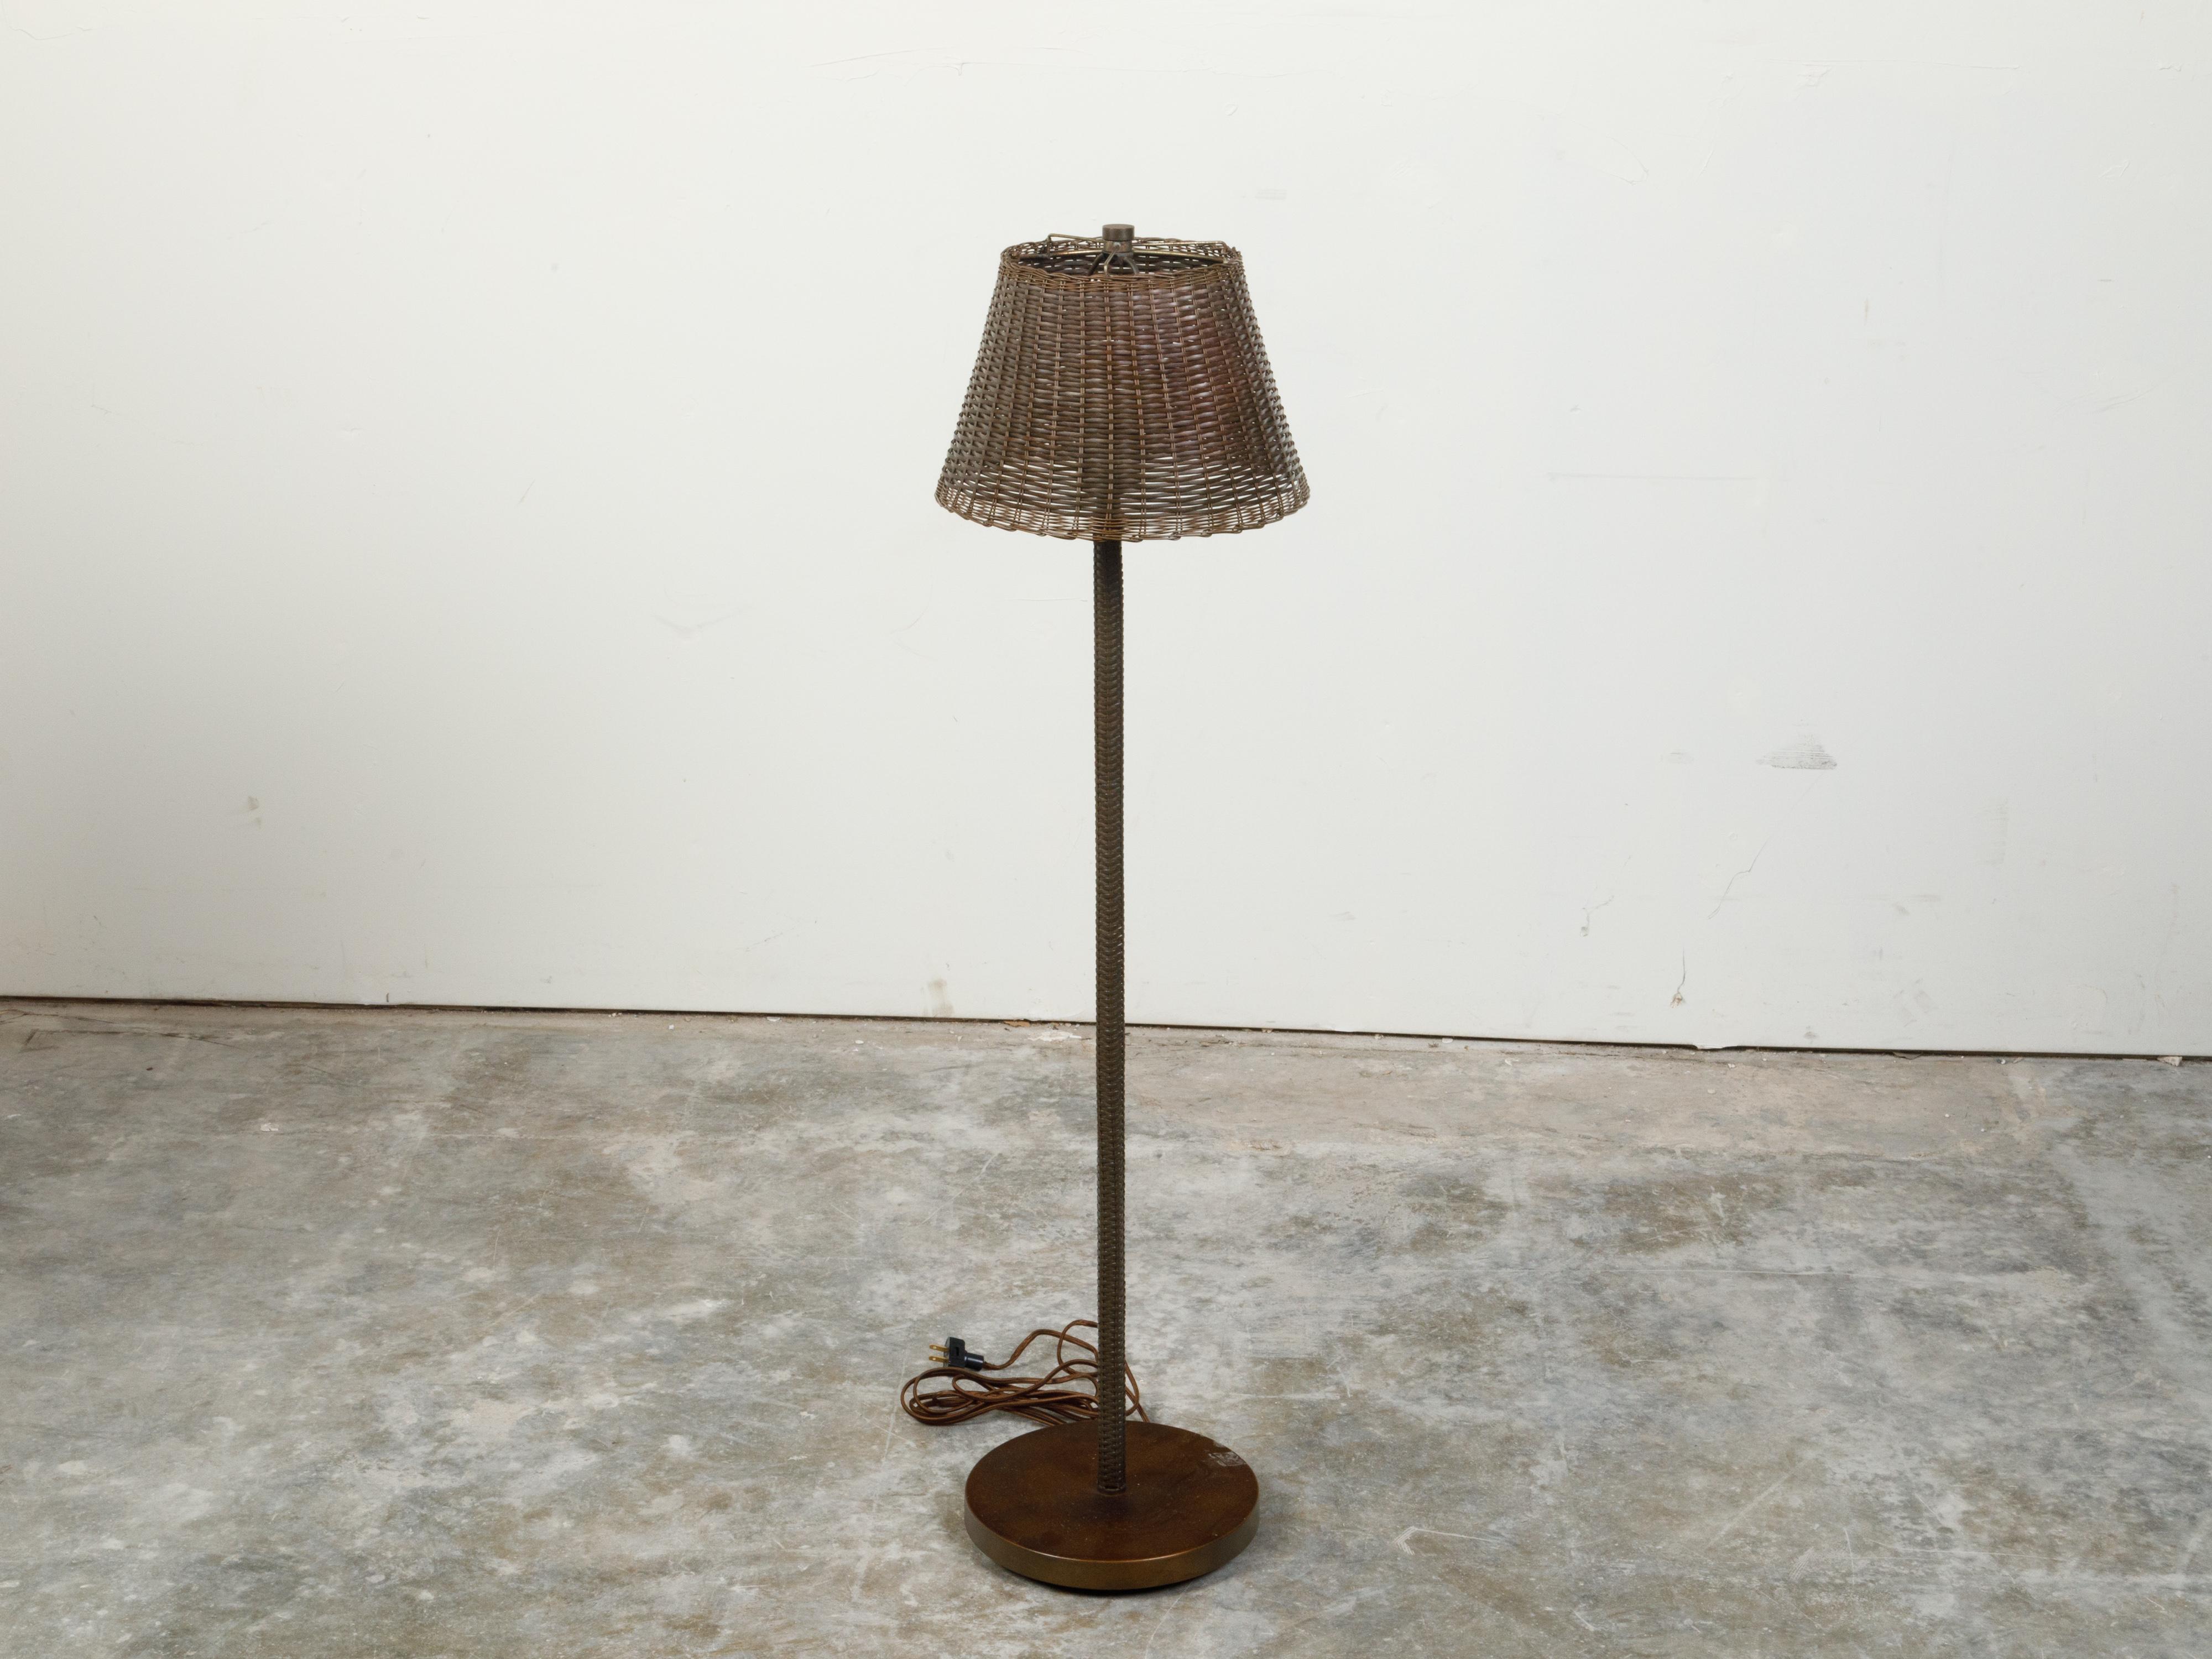 An English vintage woven basket adjustable floor lamp from the mid 20th century with single light, wired for the US. Created in England during the midcentury period, this rustic floor lamp features a woven basket securing a single light. Newly wired